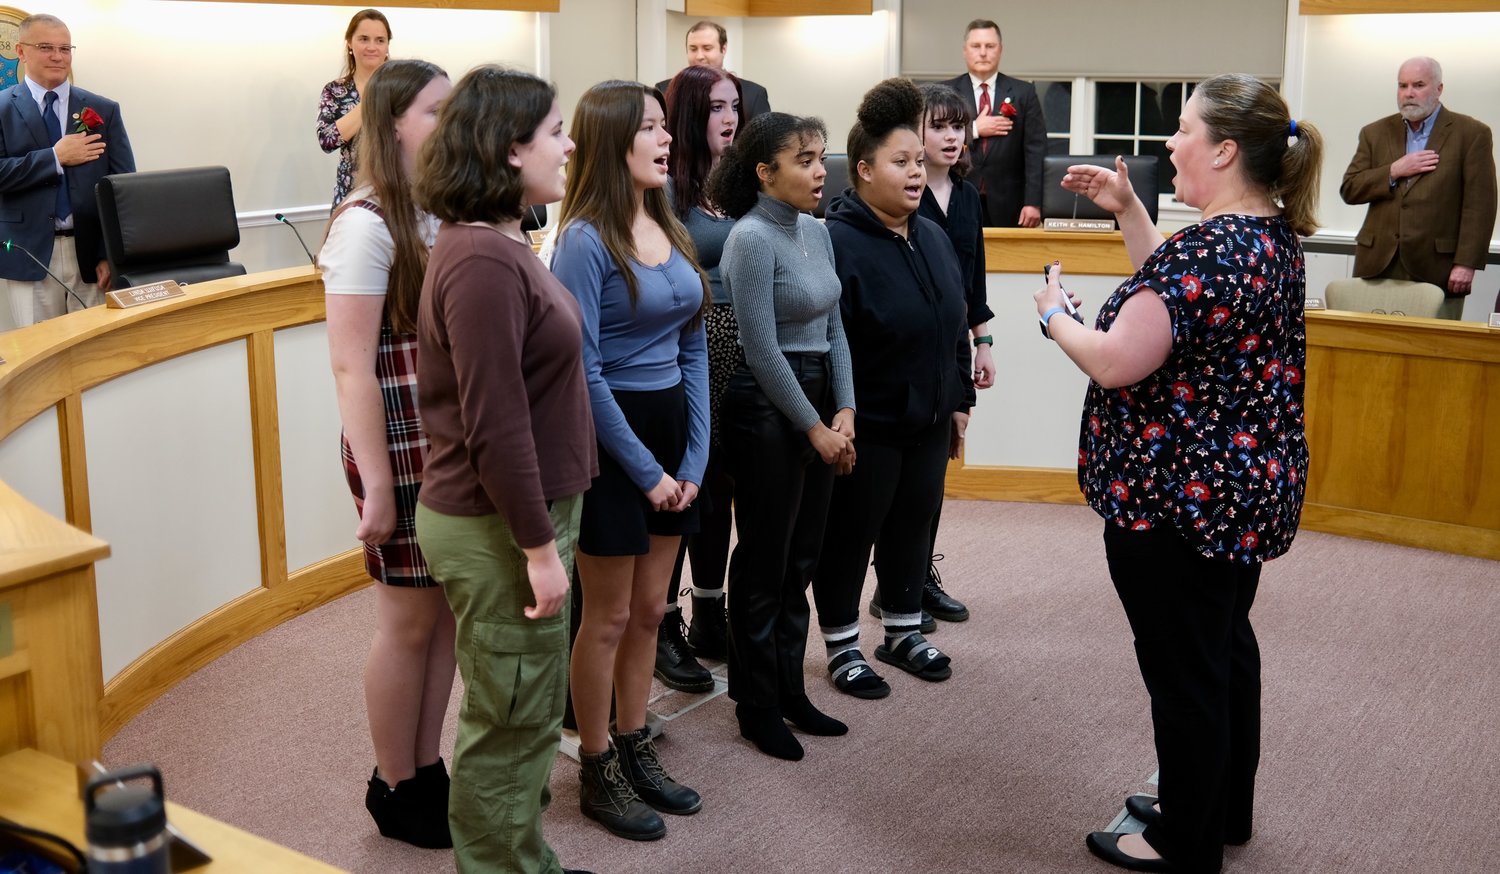 Members of the Portsmouth High School Vocal Ensemble, led by Shawna Gleason, sing The National Anthem at the start of the program.